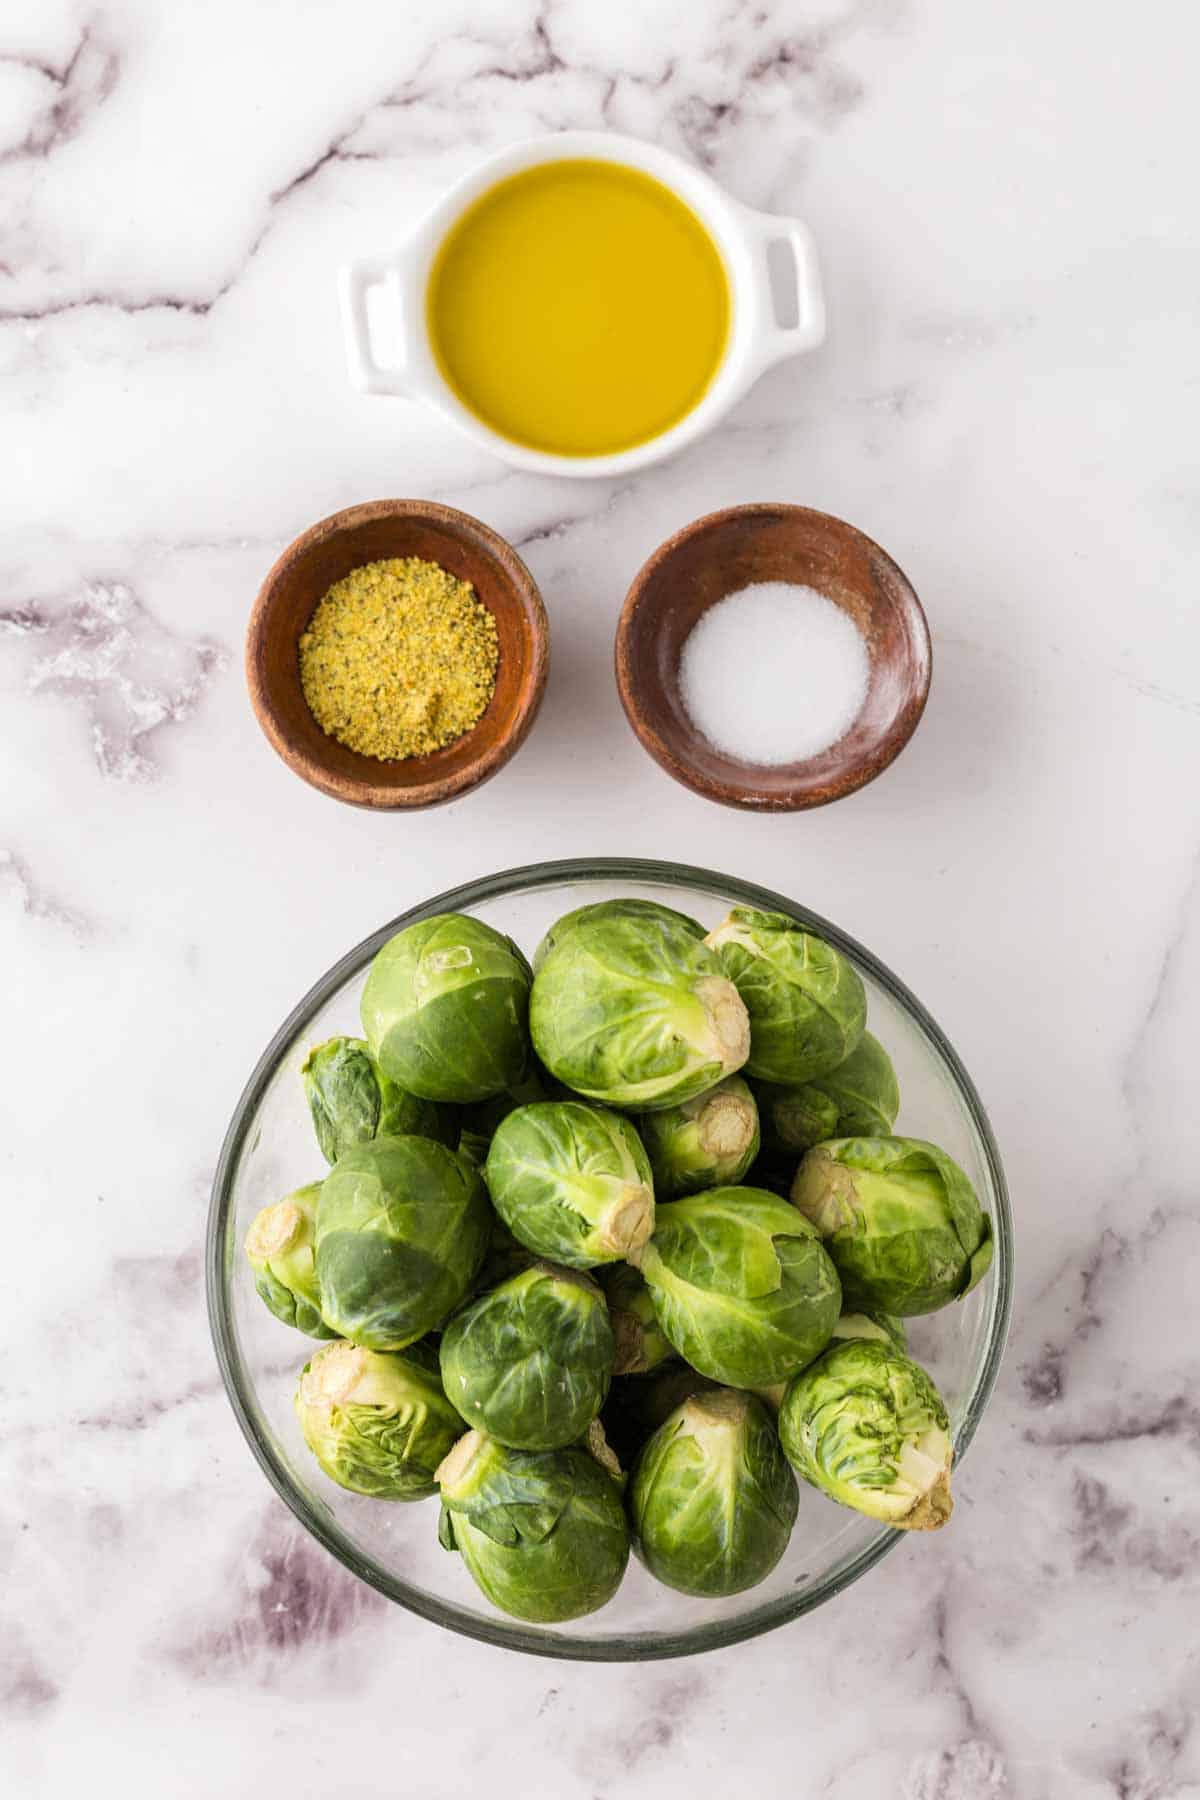 portion bowls each raw ingredient to make oven baked brussels sprouts.